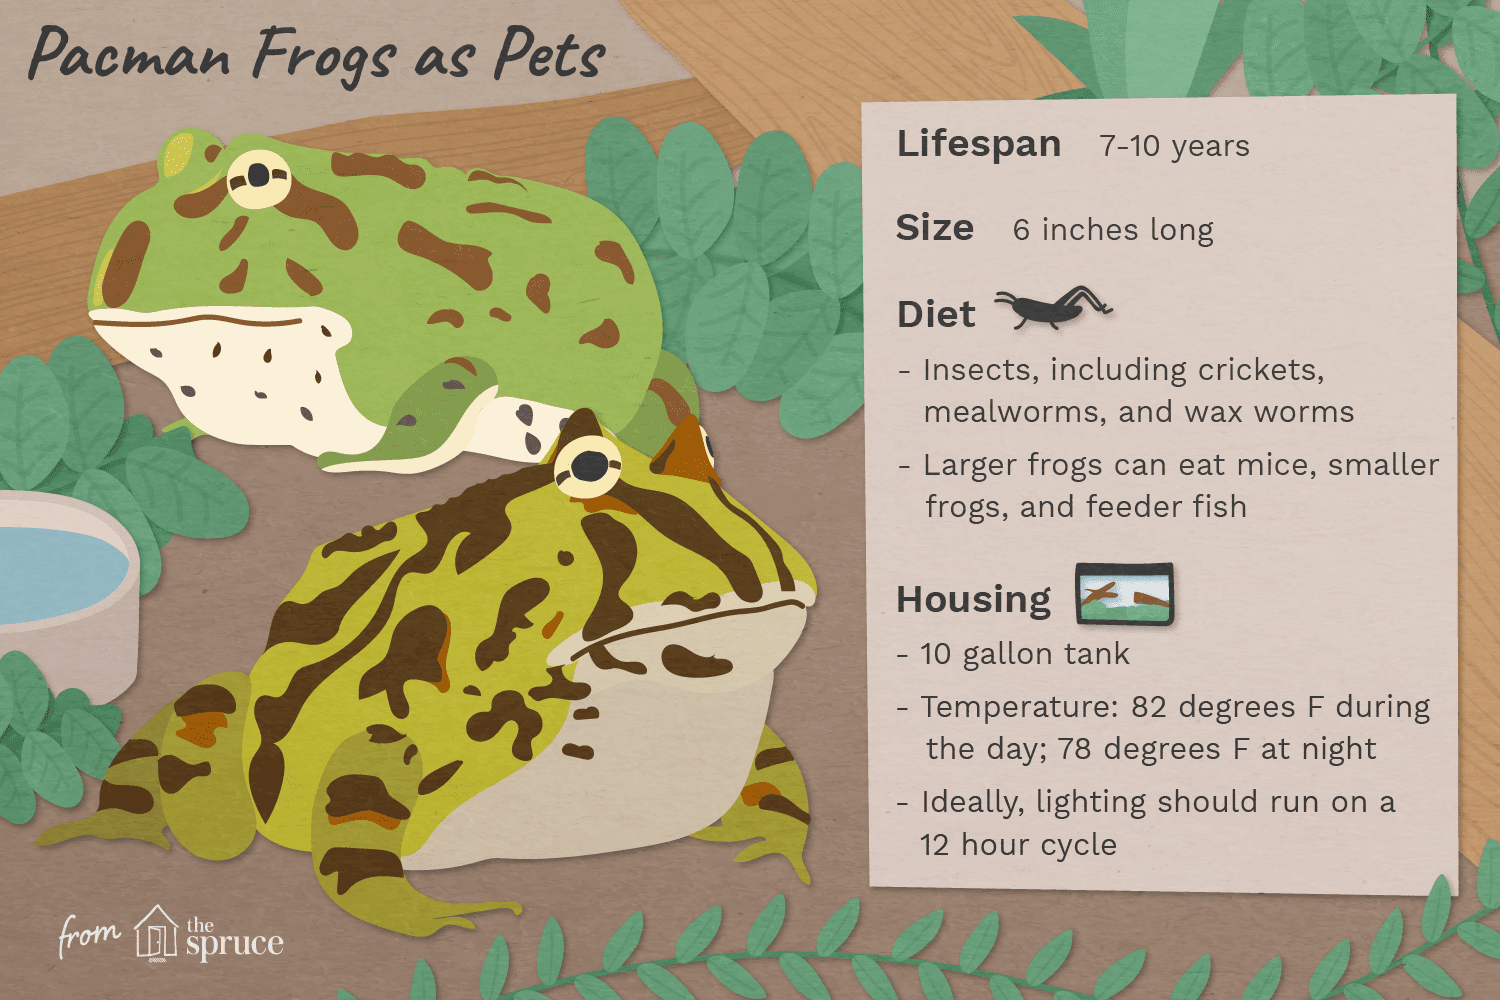 illustration of pacman frog as pets fast facts